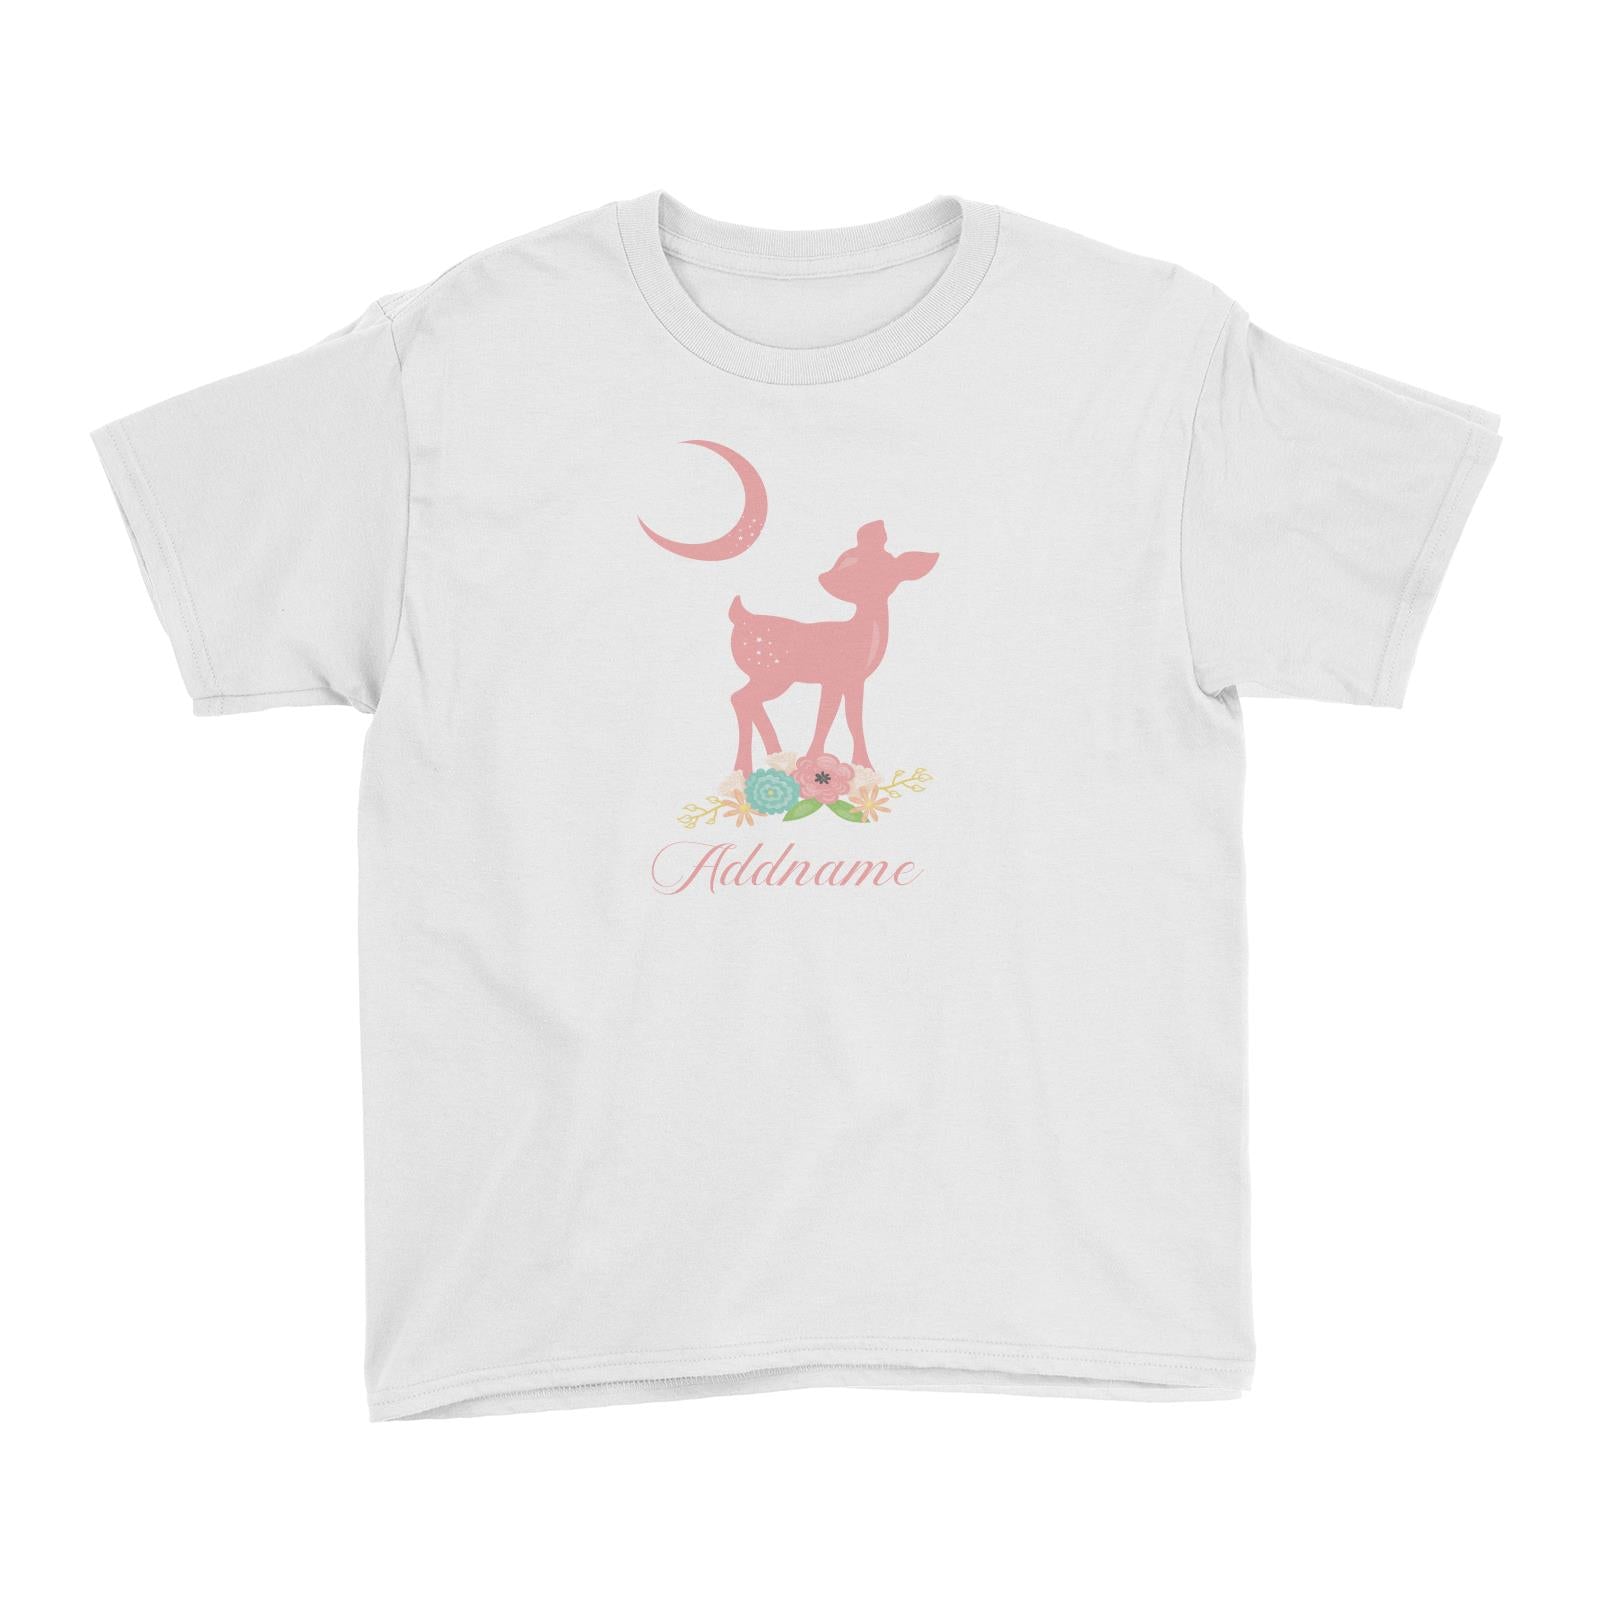 Basic Family Series Pastel Deer Pink Fawn With Flower Addname Kid's T-Shirt